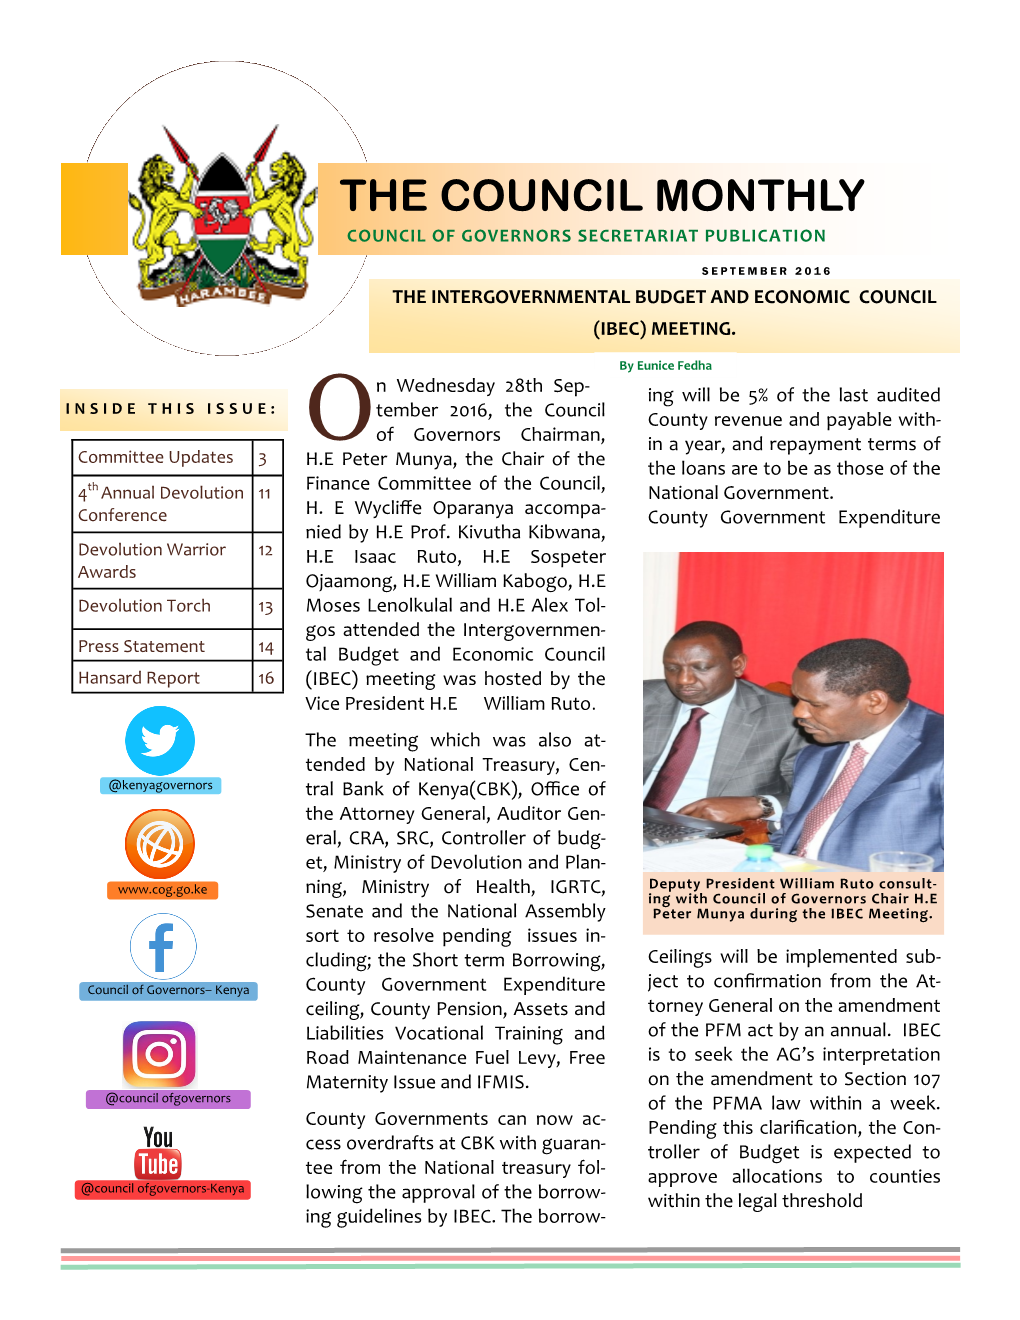 The Council Monthly Council of Governors Secretariat Publication